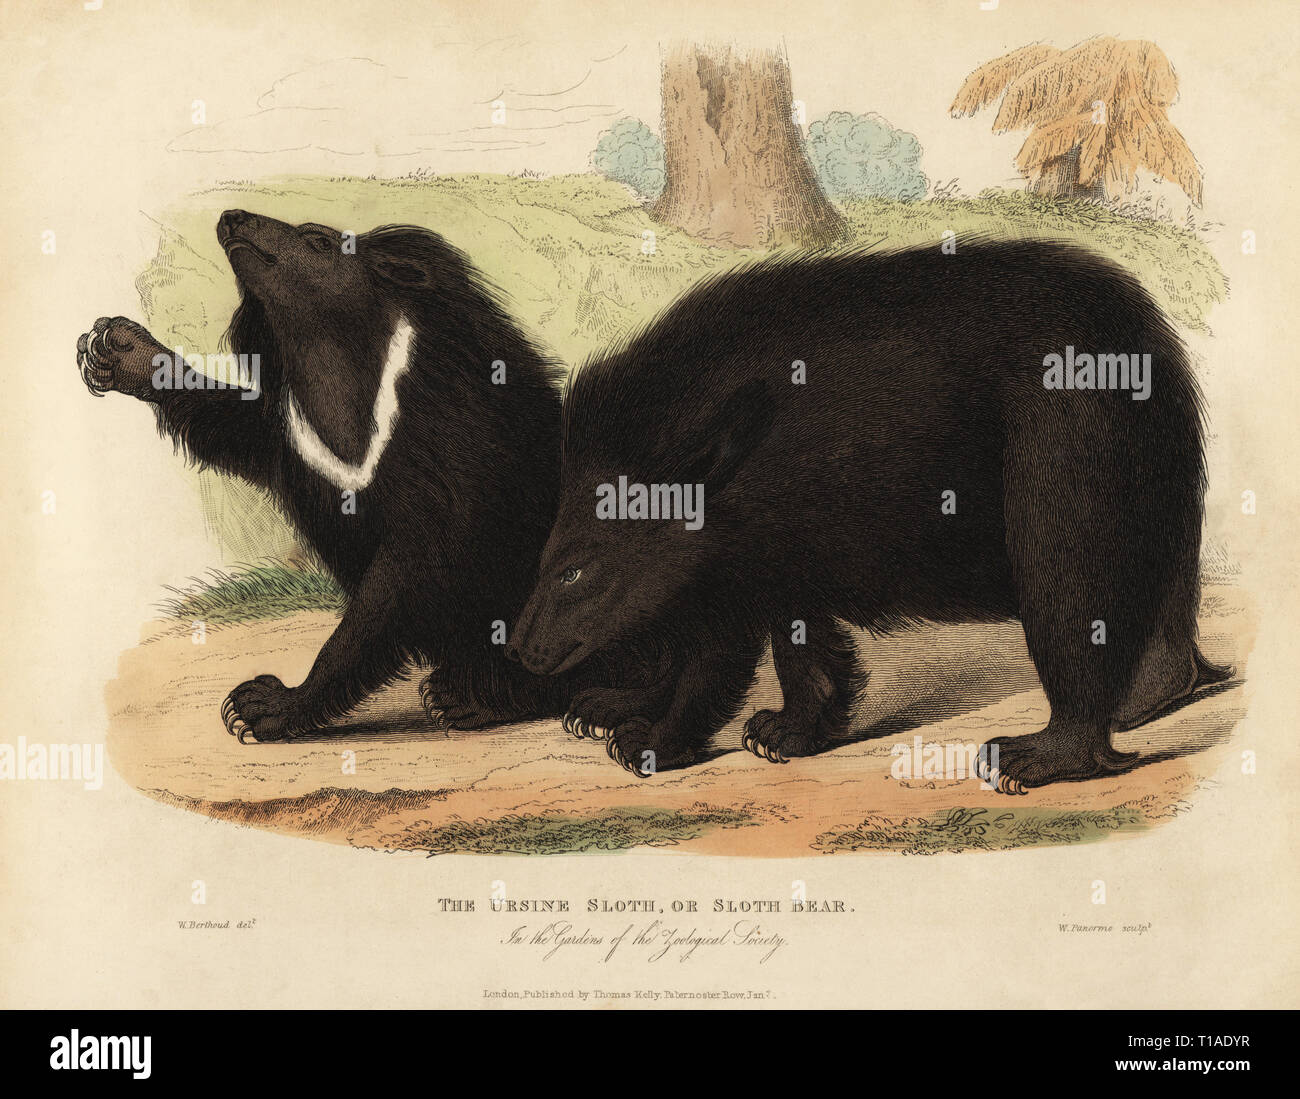 Sloth bear, Melursus ursinus. Vulnerable. The Ursine Sloth in the Gardens of the Zoological Society. Handcoloured copperplate engraved by W. Panormo after an illustration by W. Berthoud from William Smellie’s translation of Count Georges Buffon’s History of the Earth and Animated Nature, Thomas Kelly, London, 1829. Stock Photo